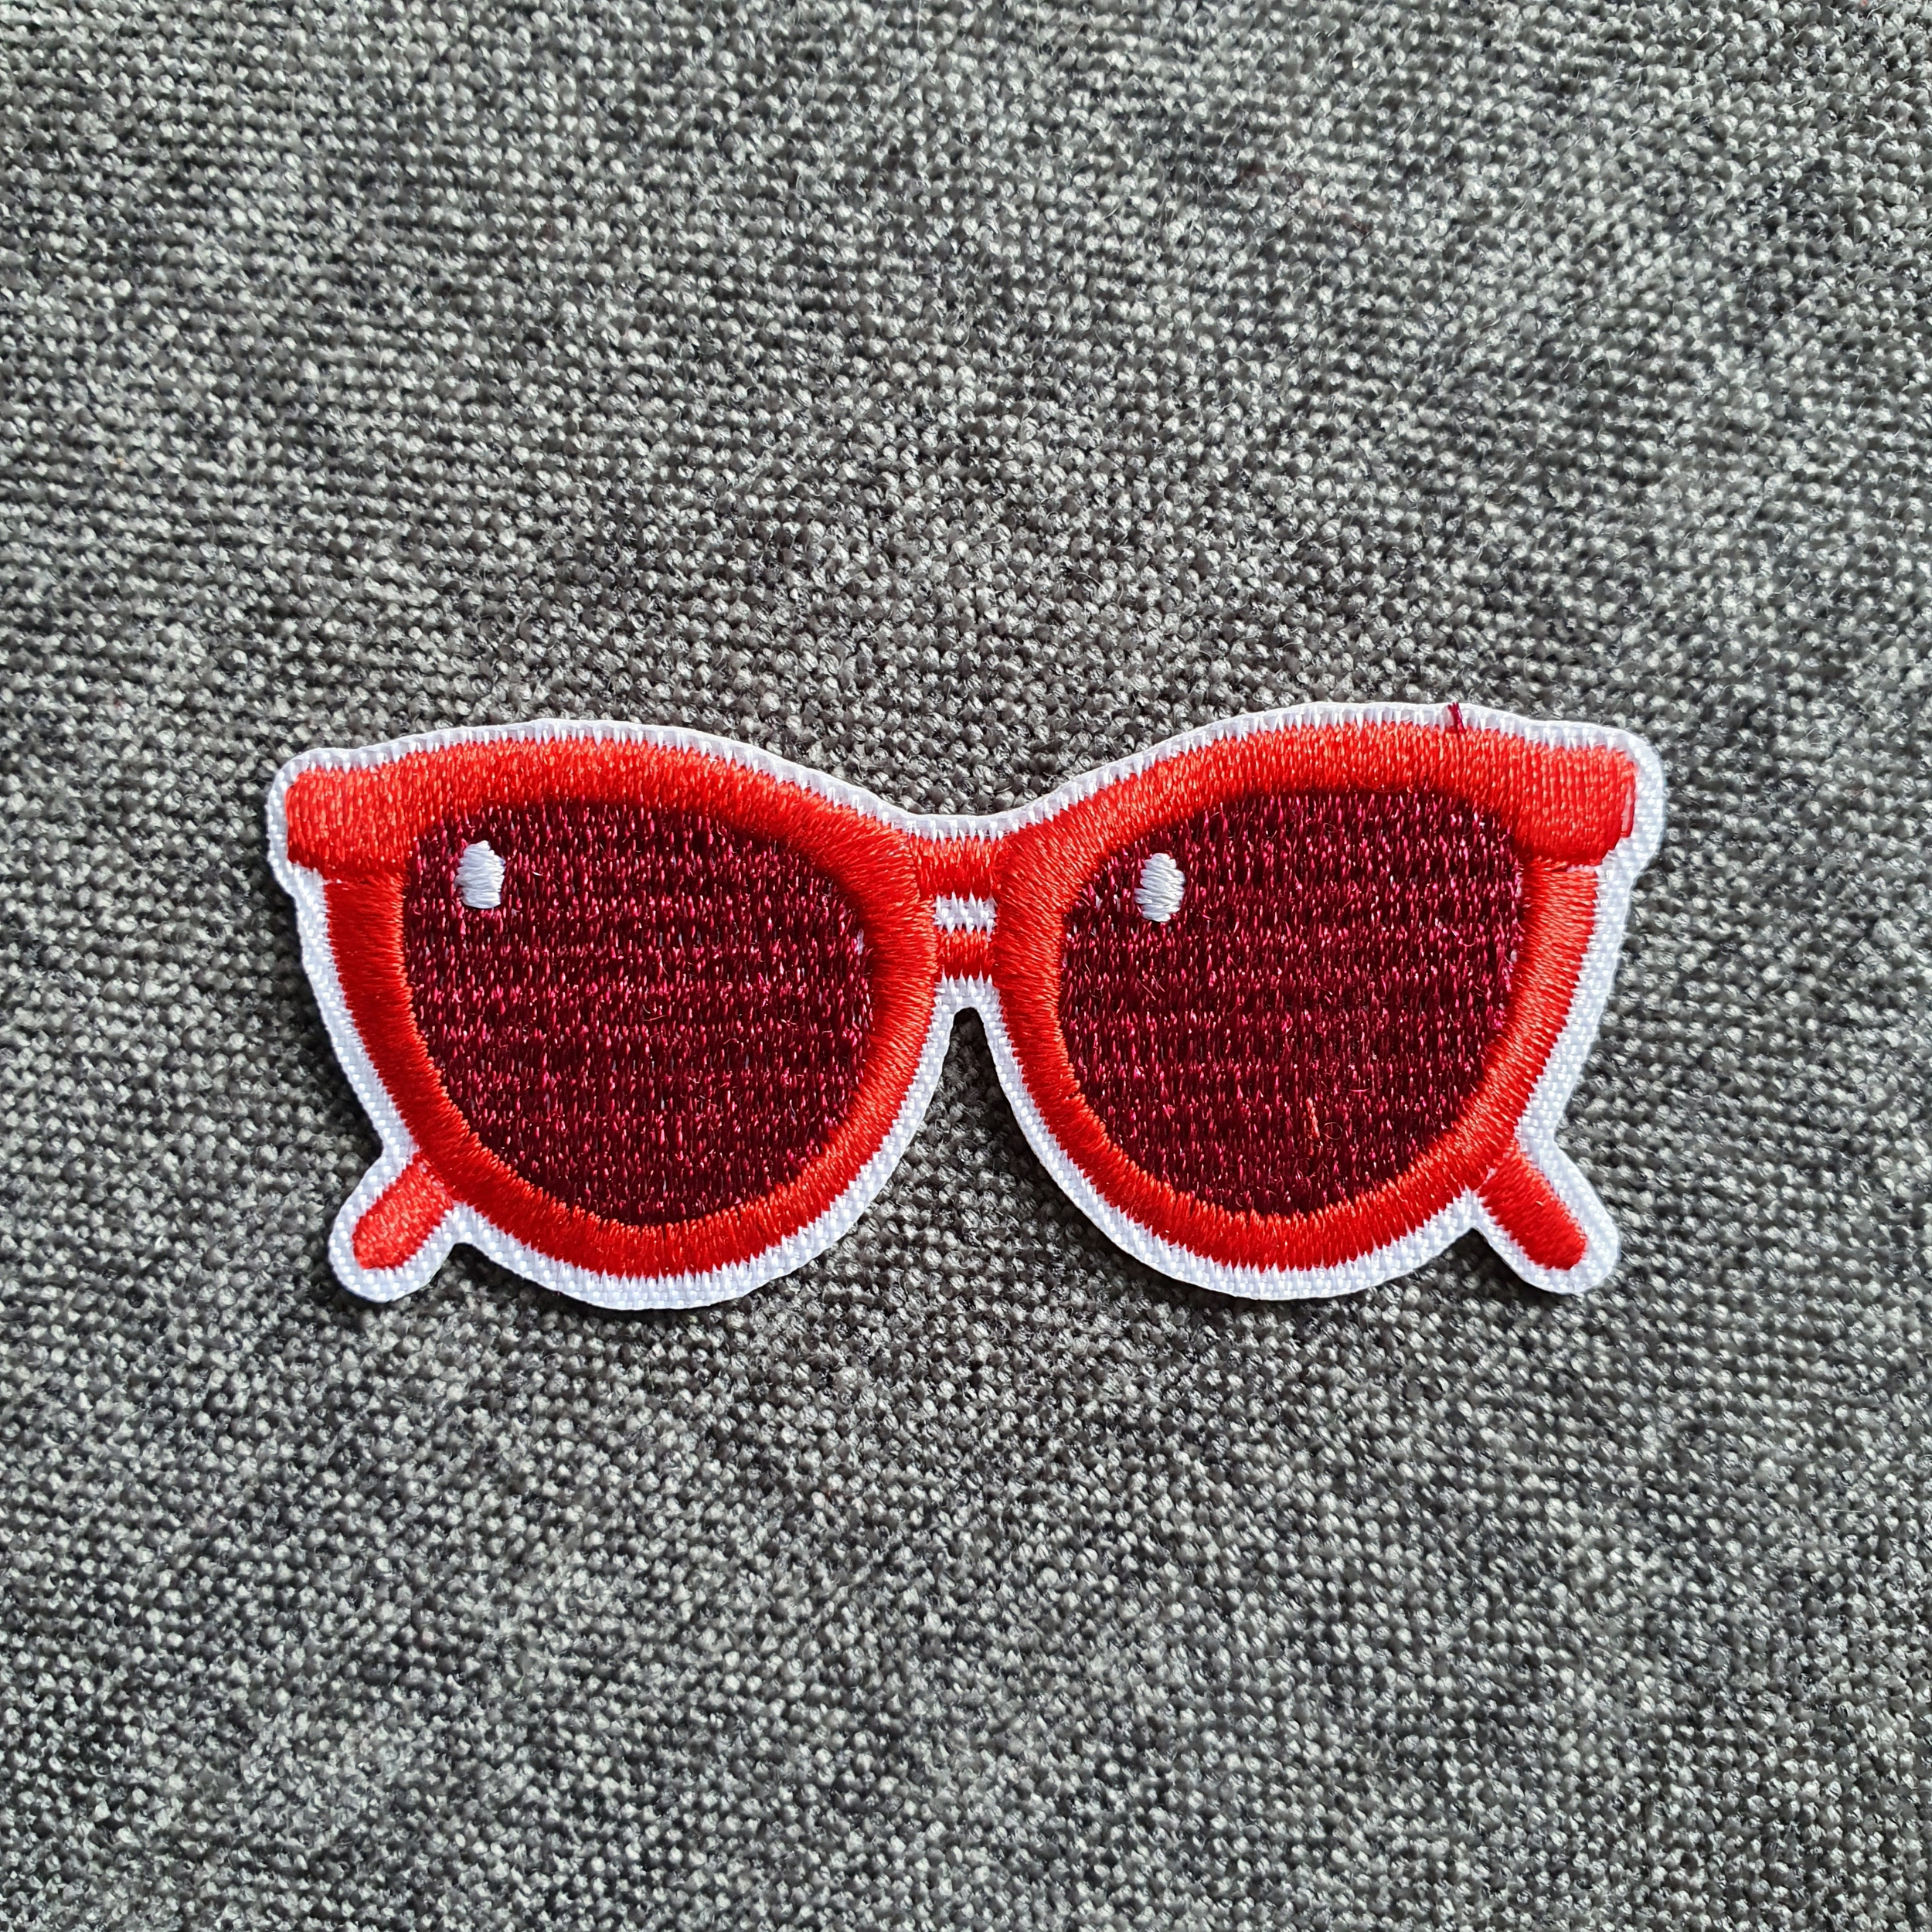 Patch thermocollant lunette de pin up rouge